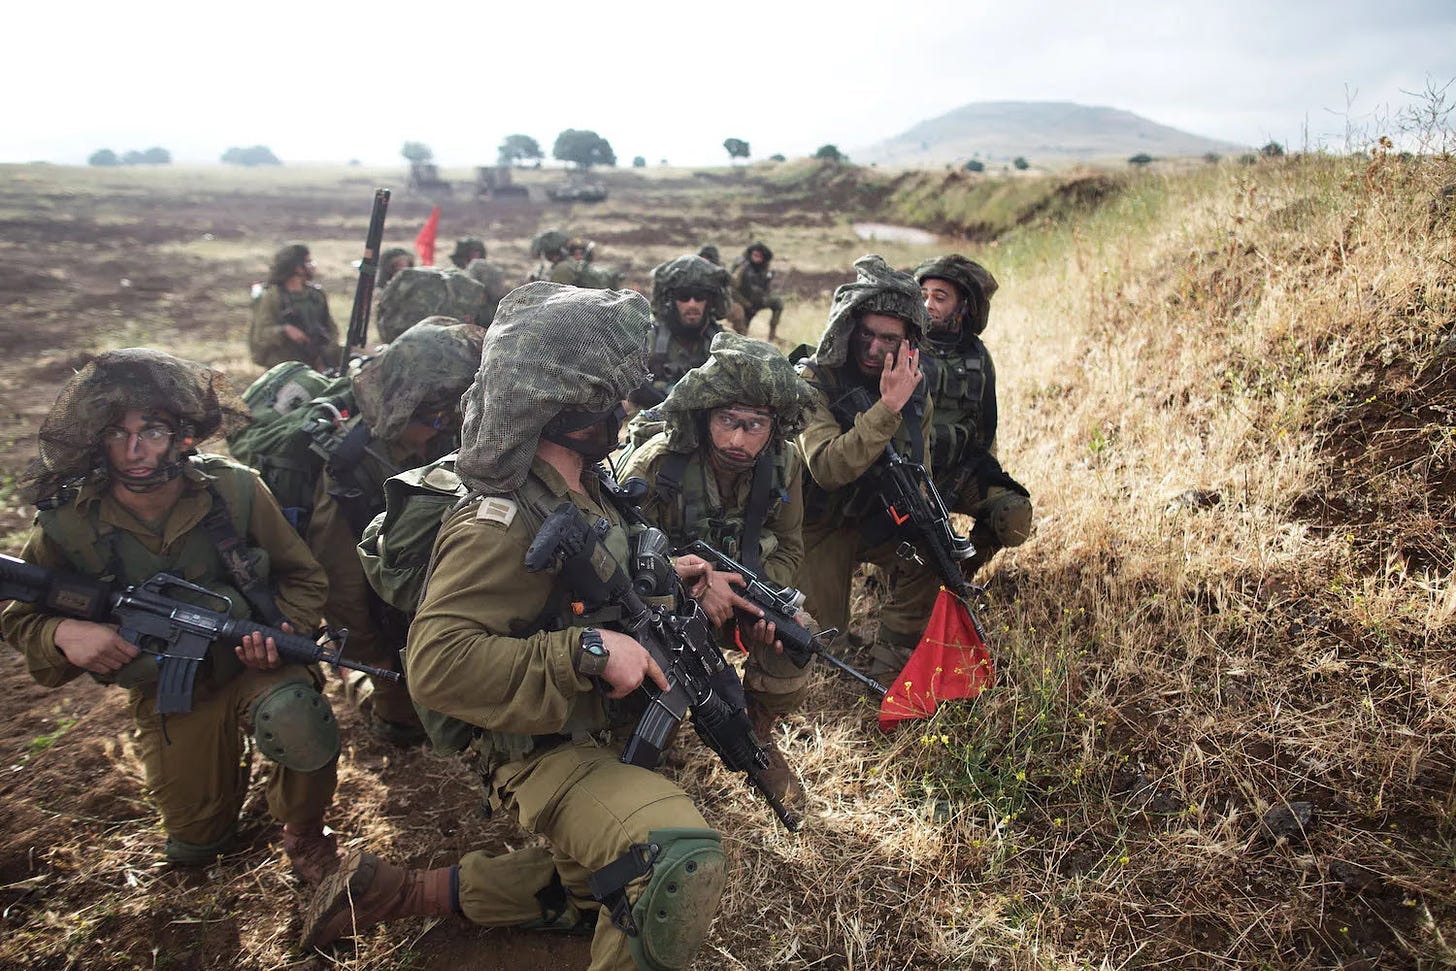 A group of about a dozen Israeli soldiers with an ultra-Orthodox Jewish battalion called Netzah Yehuda take part in a trainng operation on a cloudy but bright day. The soldiers are dressed in dark green camouflage and tactical face paint as they hold rifles and gesture to each other as they crouch to hide behind a grassy ridge. A muddy field stretches into the distance behind them.